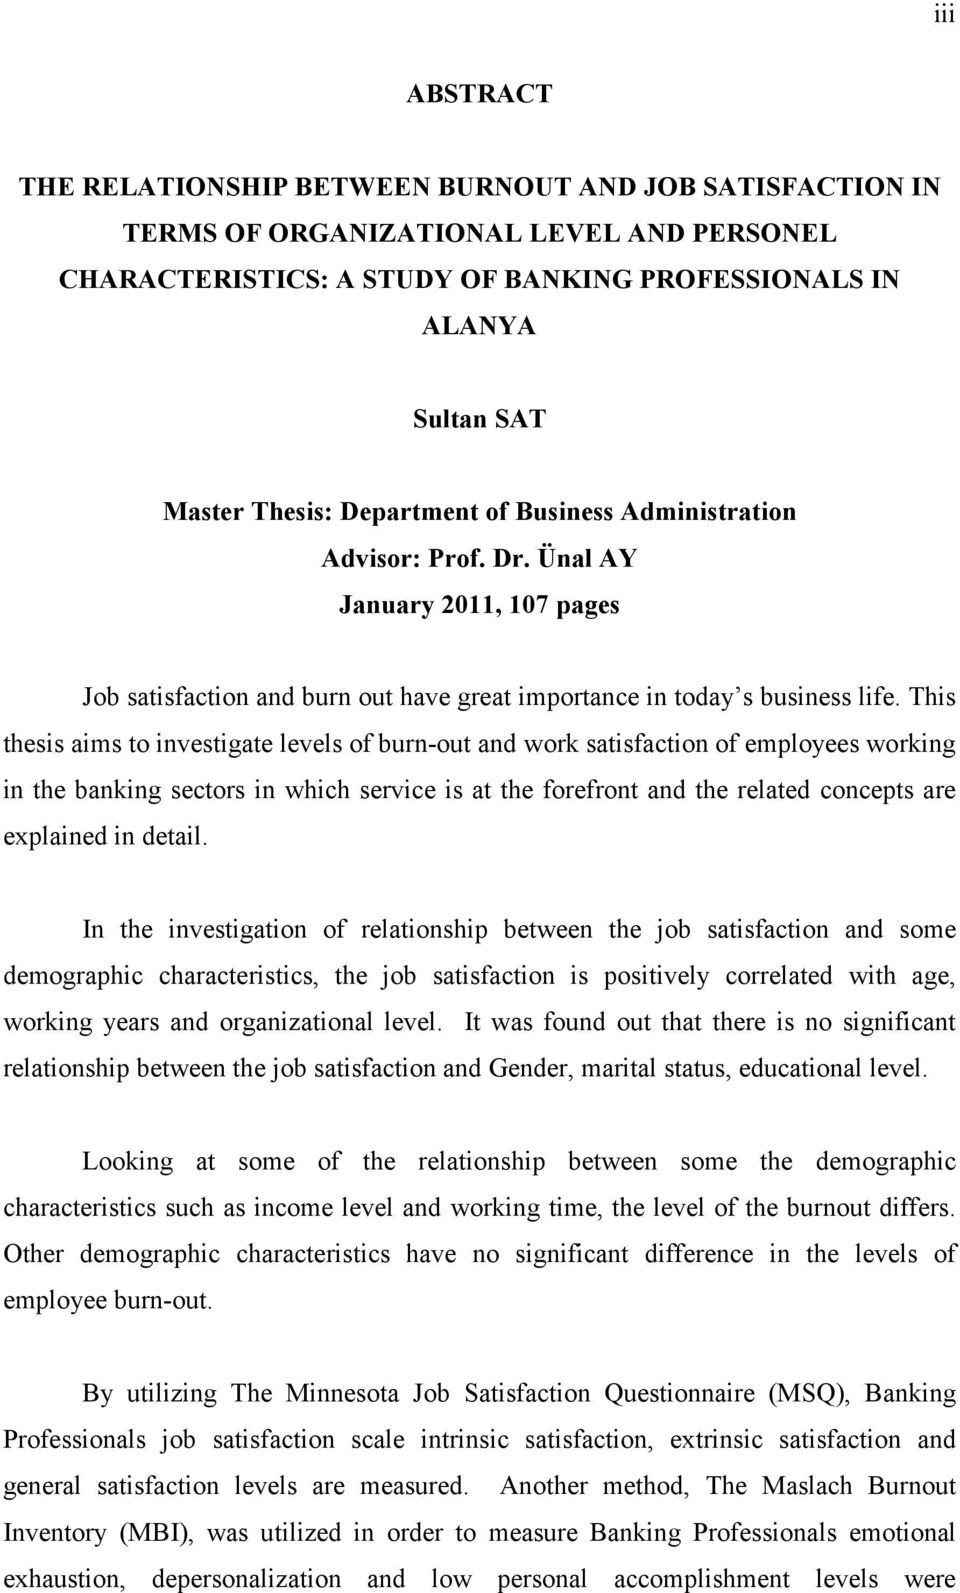 This thesis aims to investigate levels of burn-out and work satisfaction of employees working in the banking sectors in which service is at the forefront and the related concepts are explained in